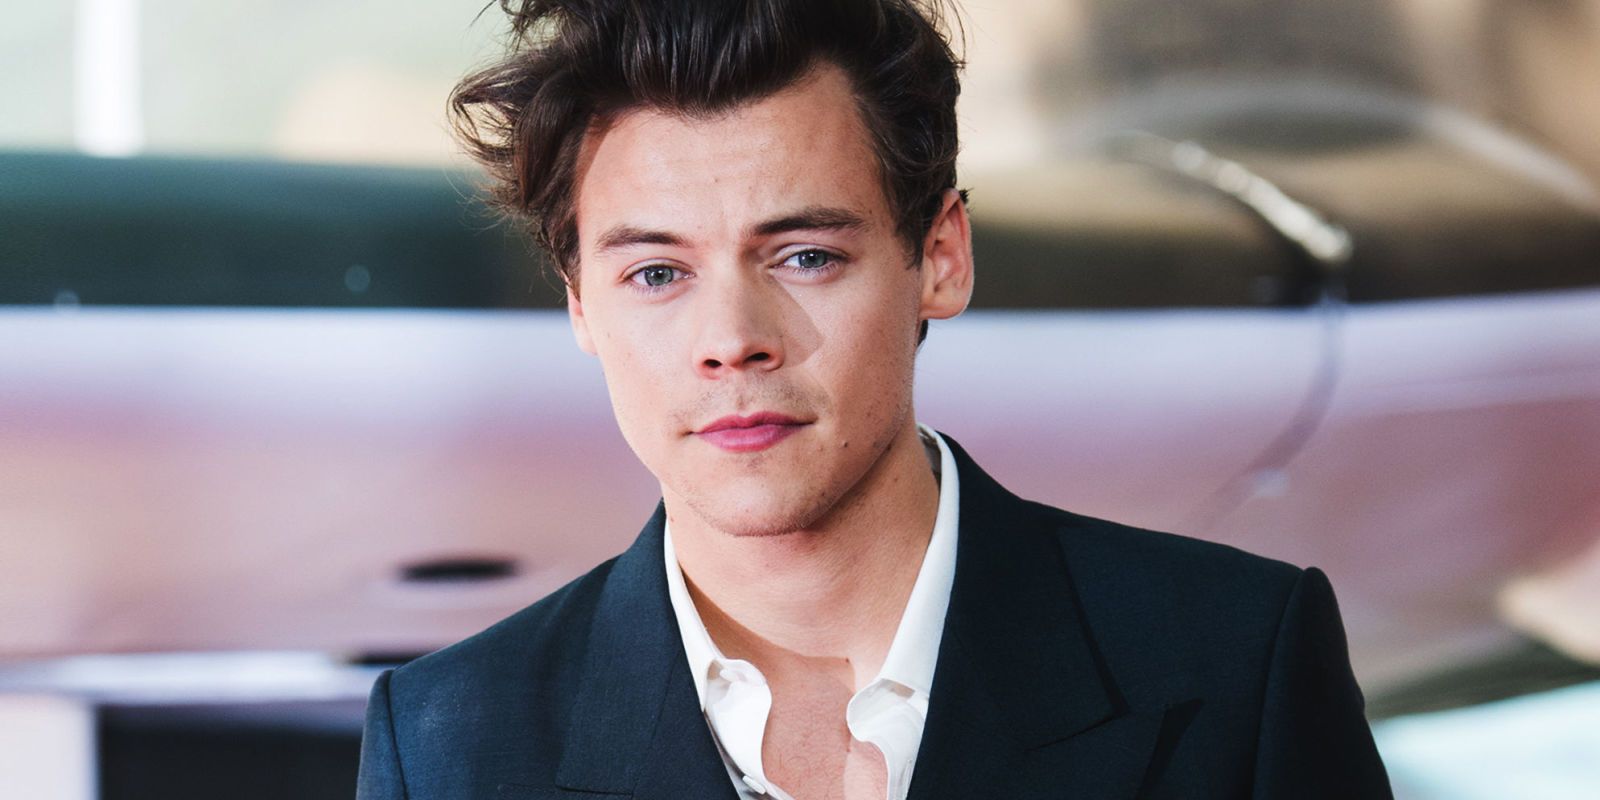 Photos: Harry Styles Got a Dramatic Hair Cut and Fans Are Divided